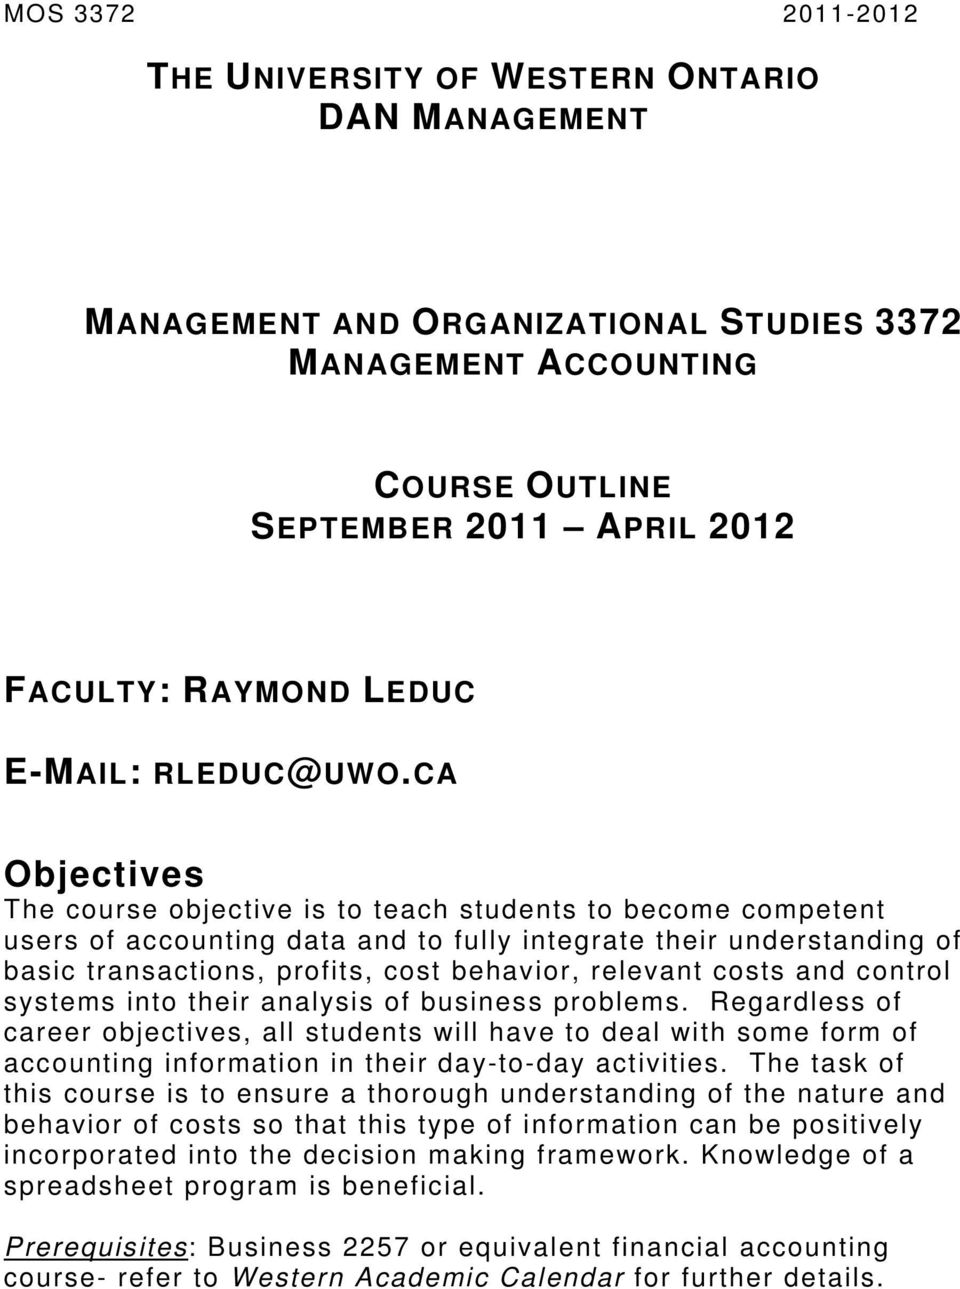 The University Of Western Ontario Dan Management Management And Organizational Studies 3372 Management Accounting Pdf Free Download